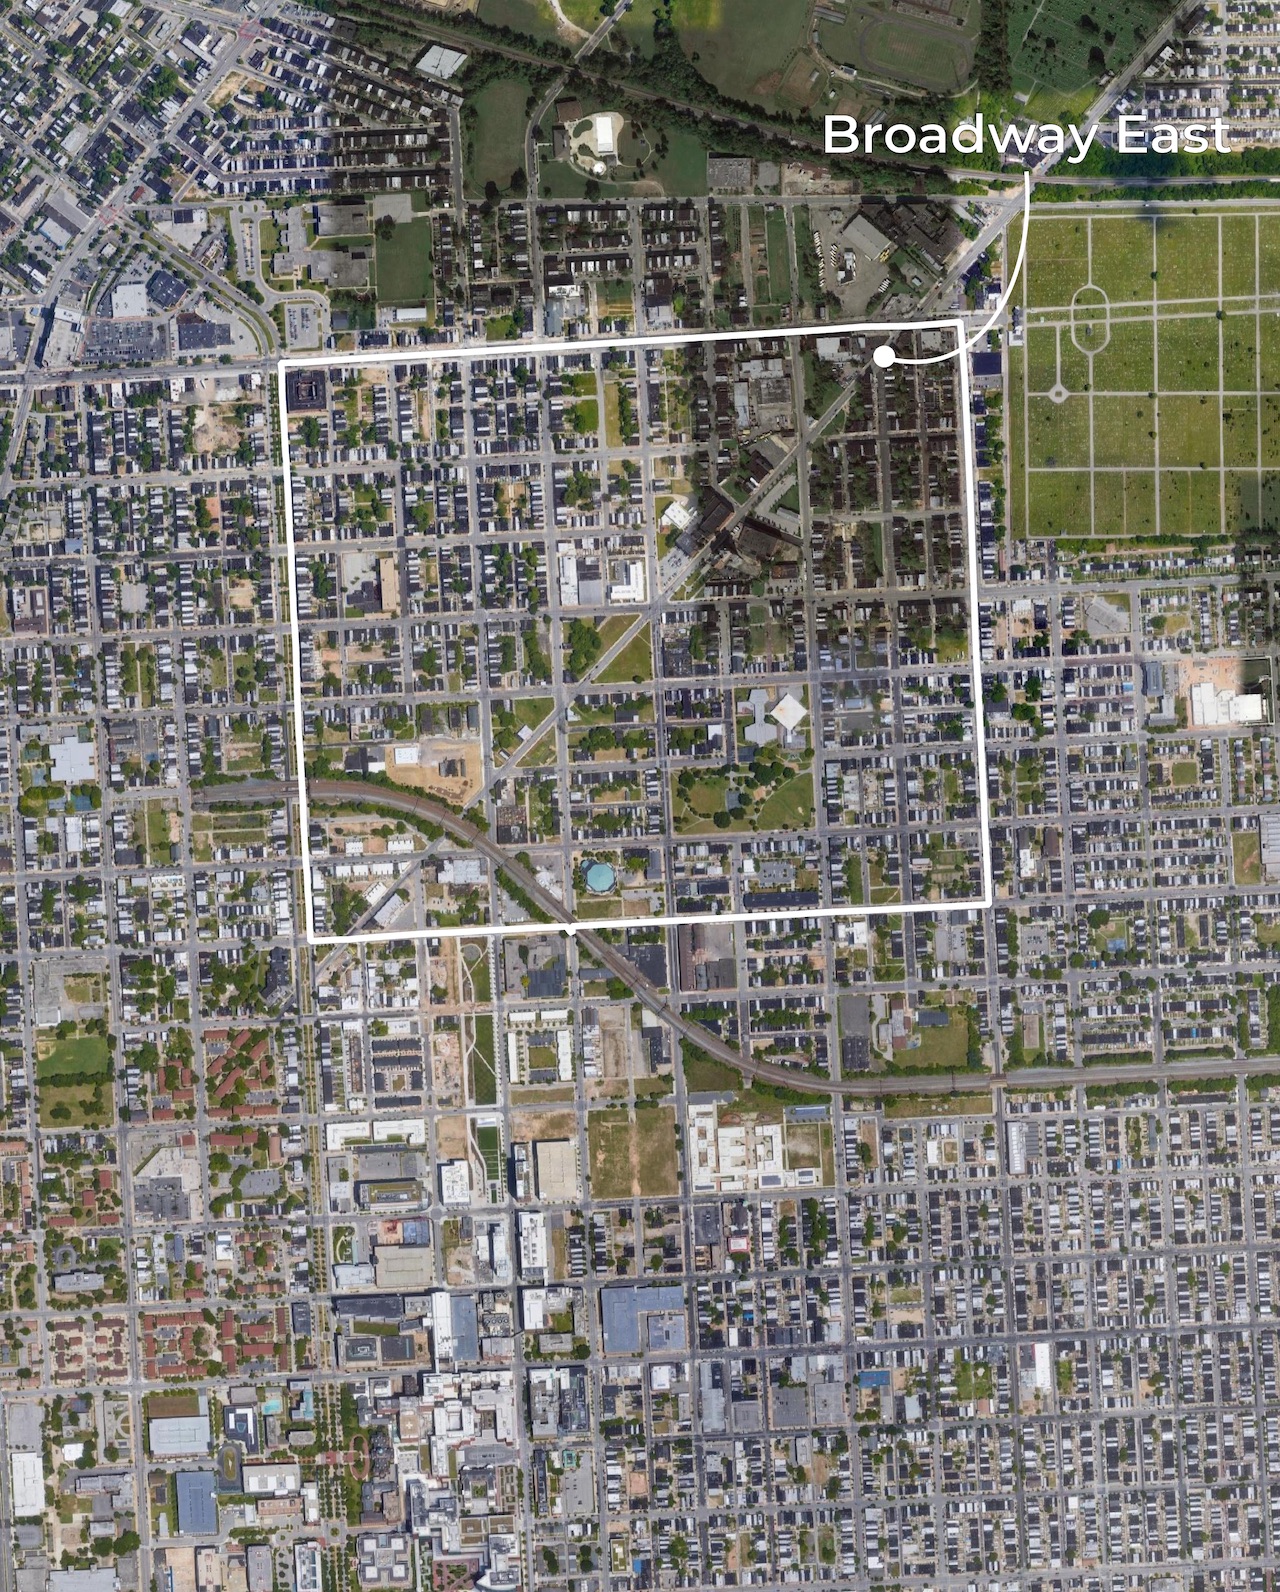 The map is fully zoomed in on a satellite image of Broadway East, an area clearly full of more buildings and concrete than trees.